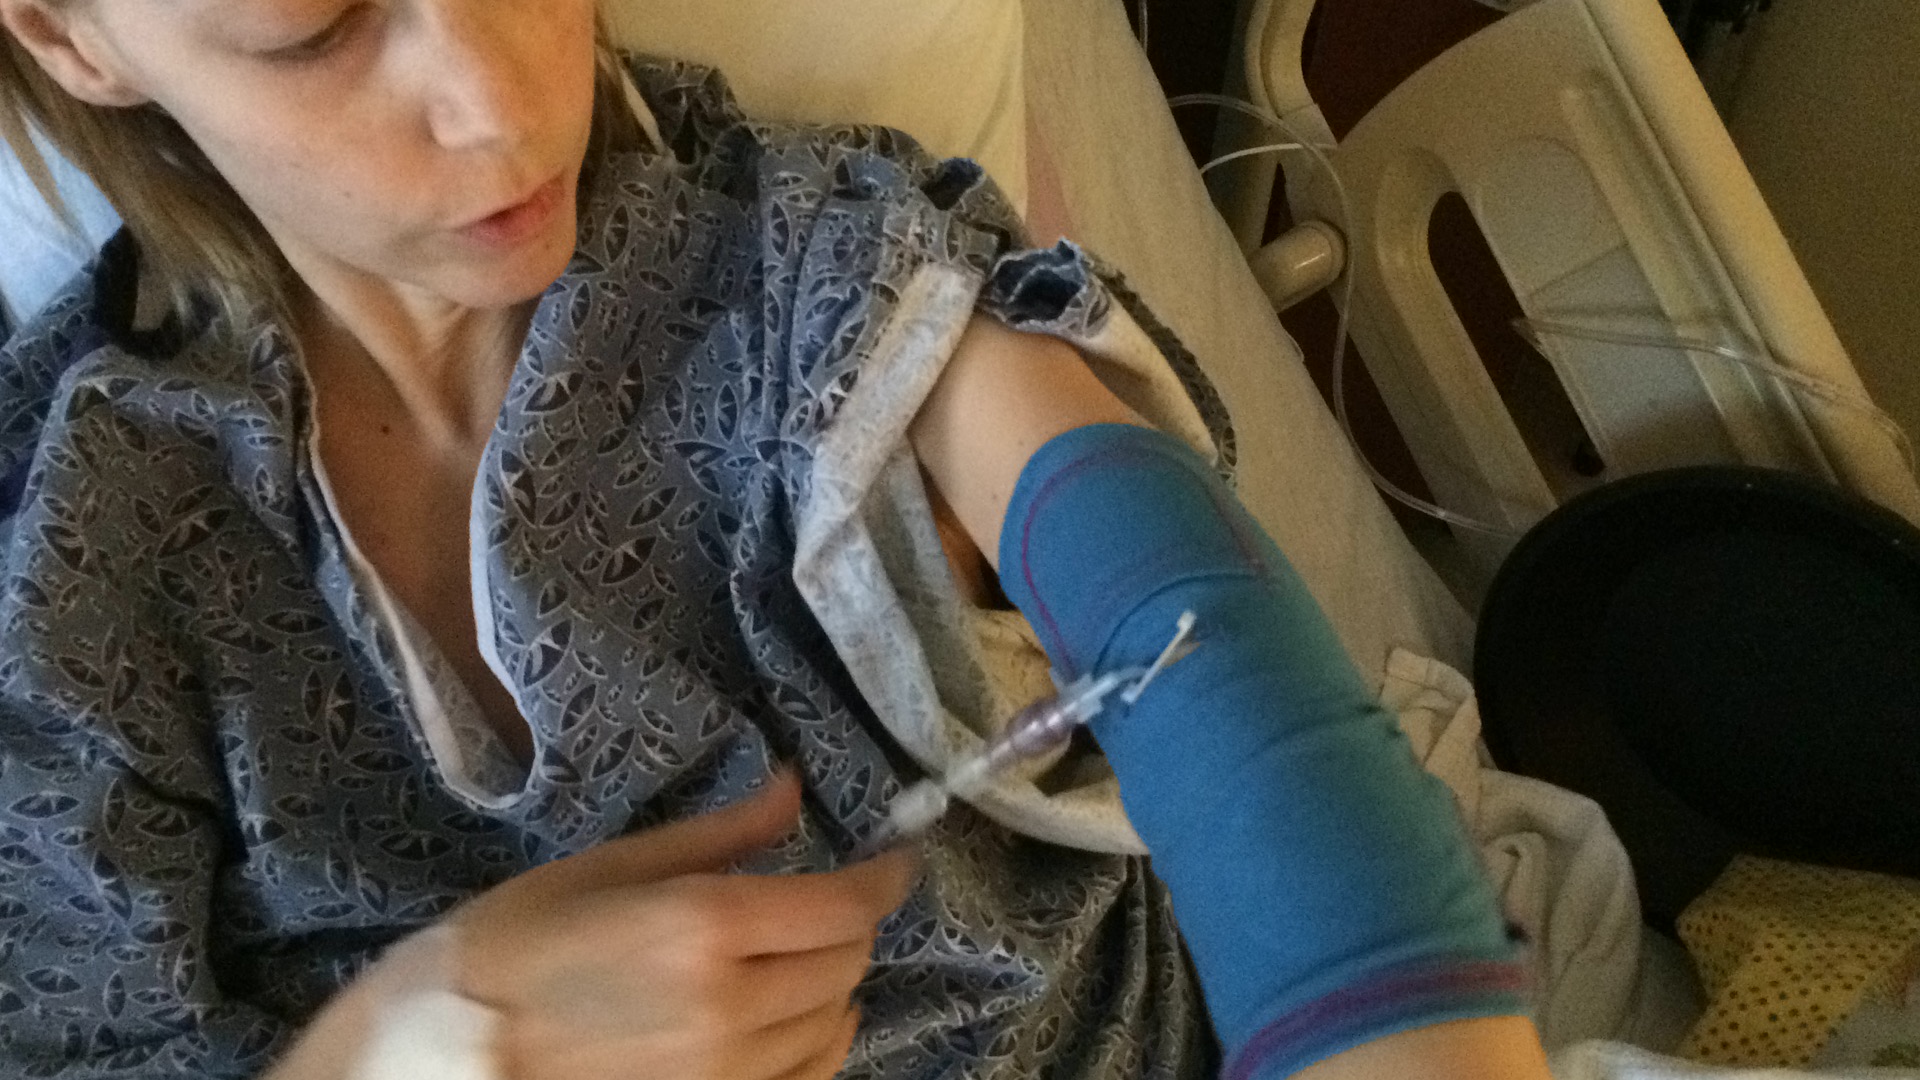 Kezia using her own CareAline PICC sleeve in 2016